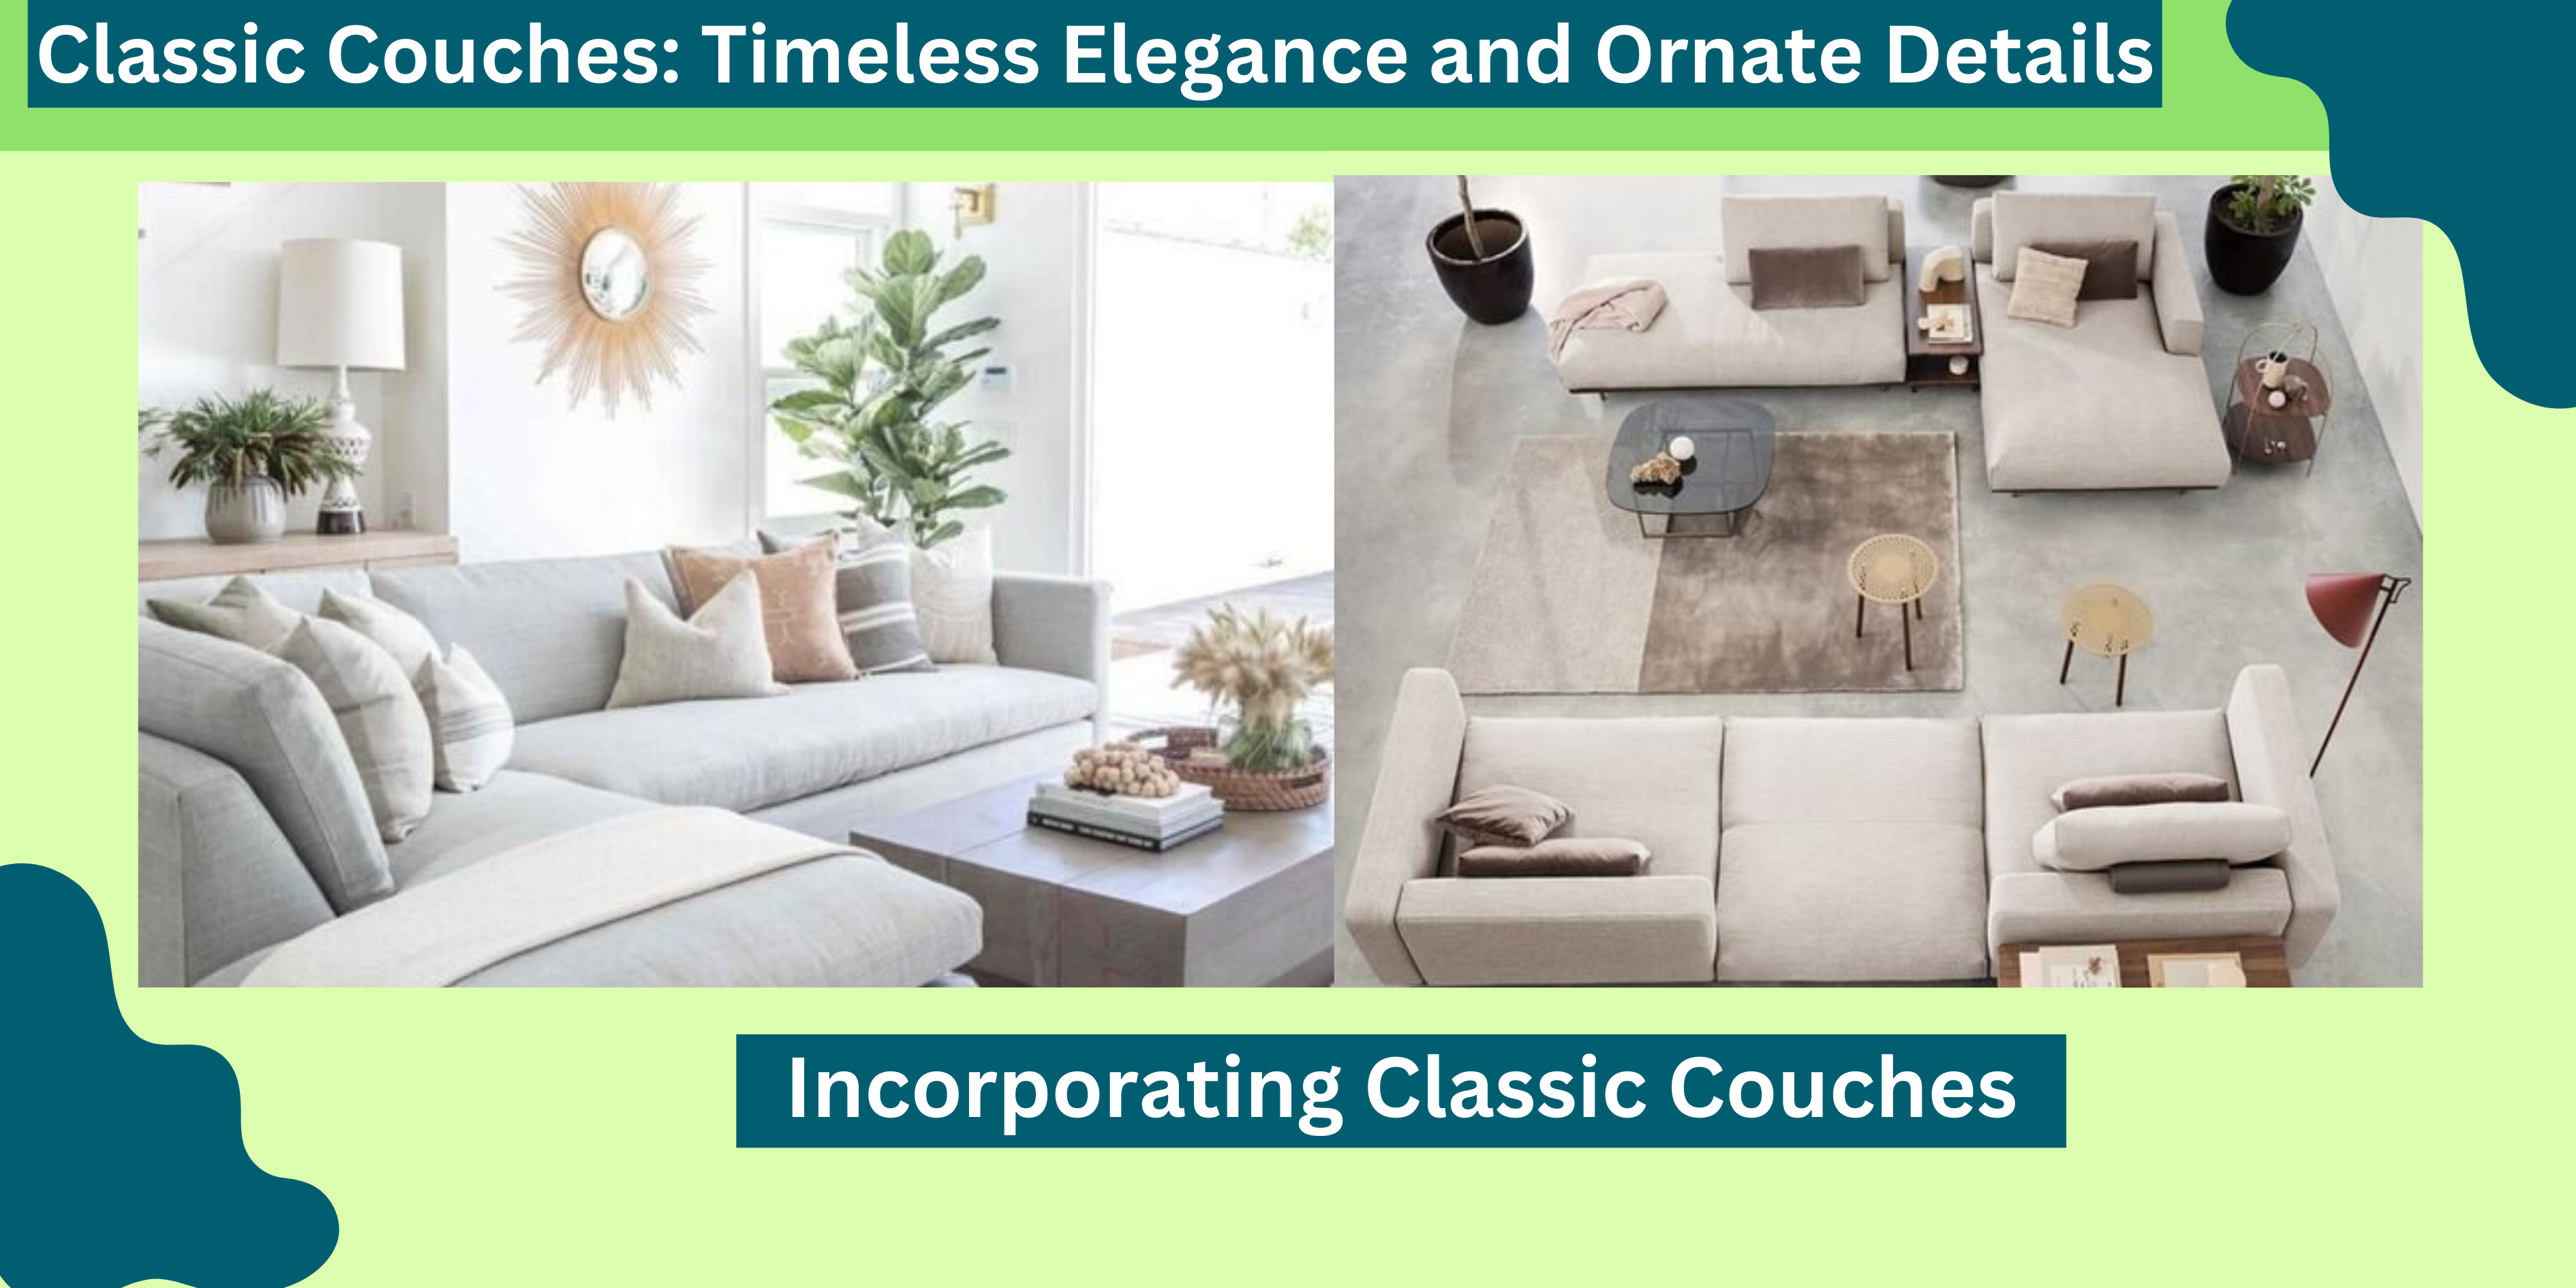 Classic Couches Timeless Elegance and Ornate Details